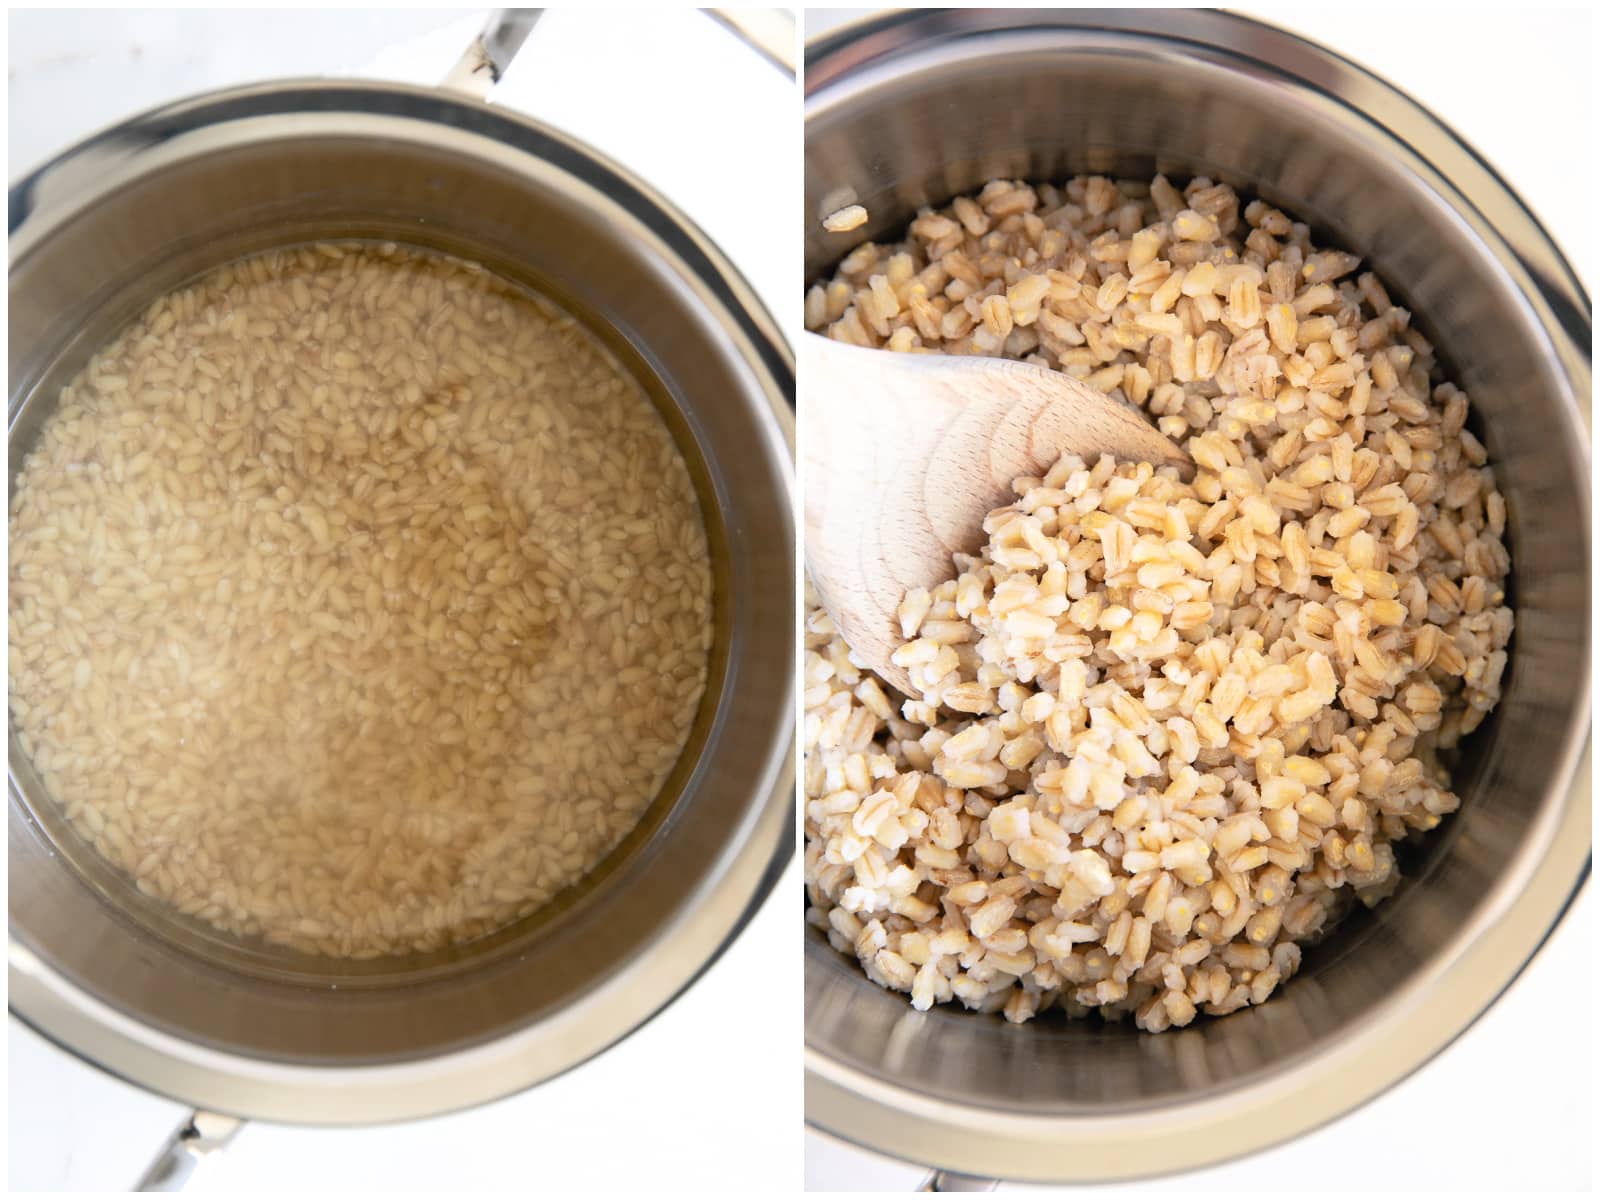 Two images in a collage: the first is of a pot filled with water and uncooked pearl barley and the second image of a pot filled with cooked pearl barley being fluffed with a wooden serving spoon.